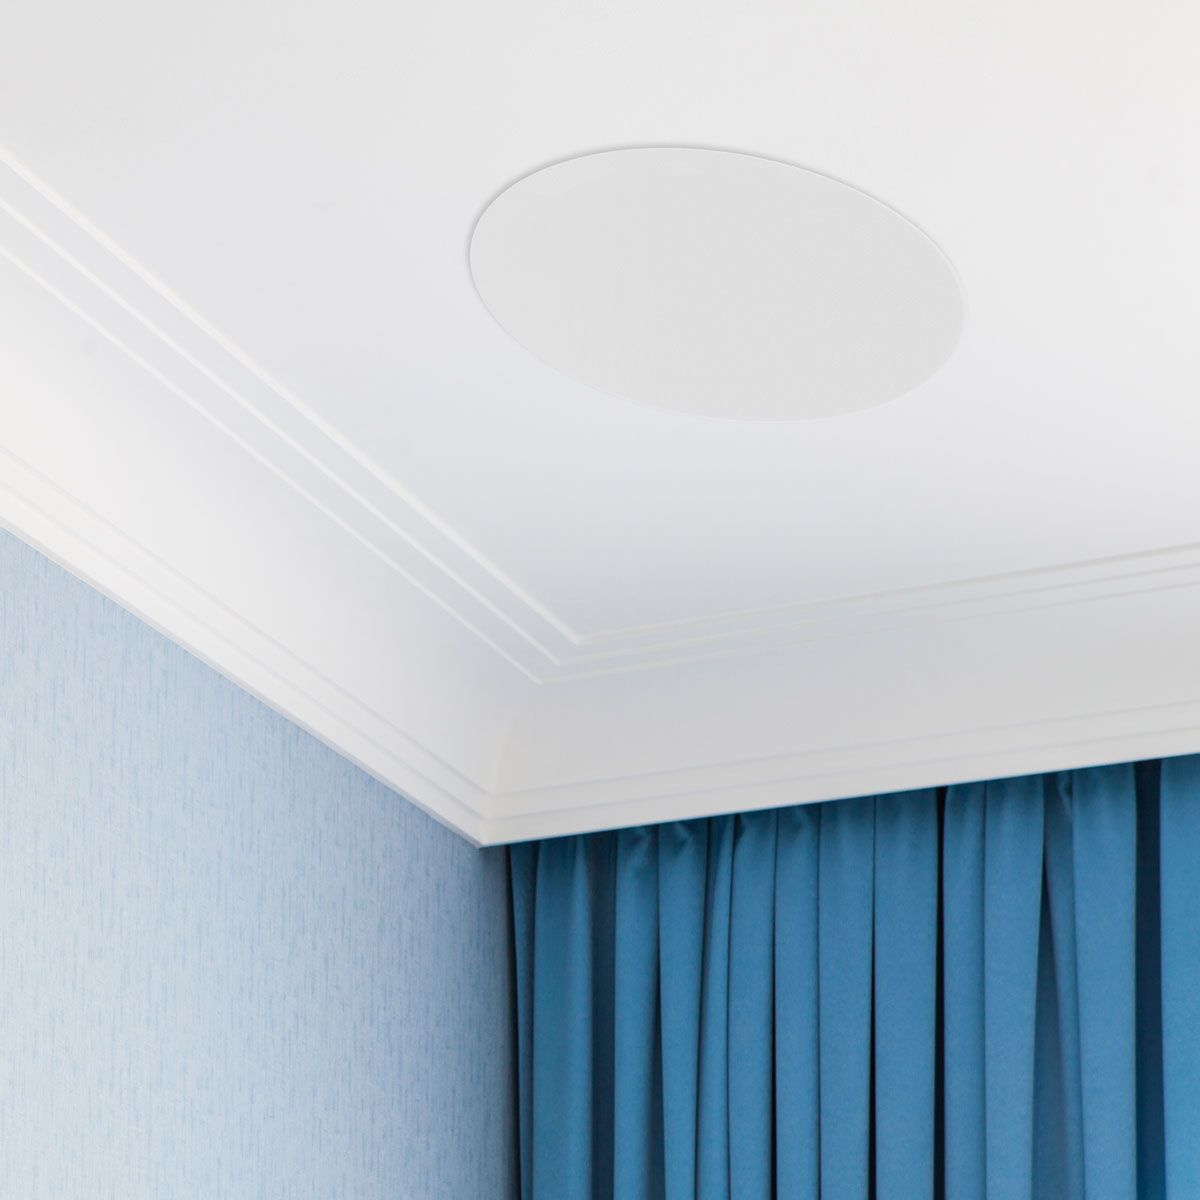 MartinLogan Motion MC6 In-Ceiling Speaker, mounted in the ceiling